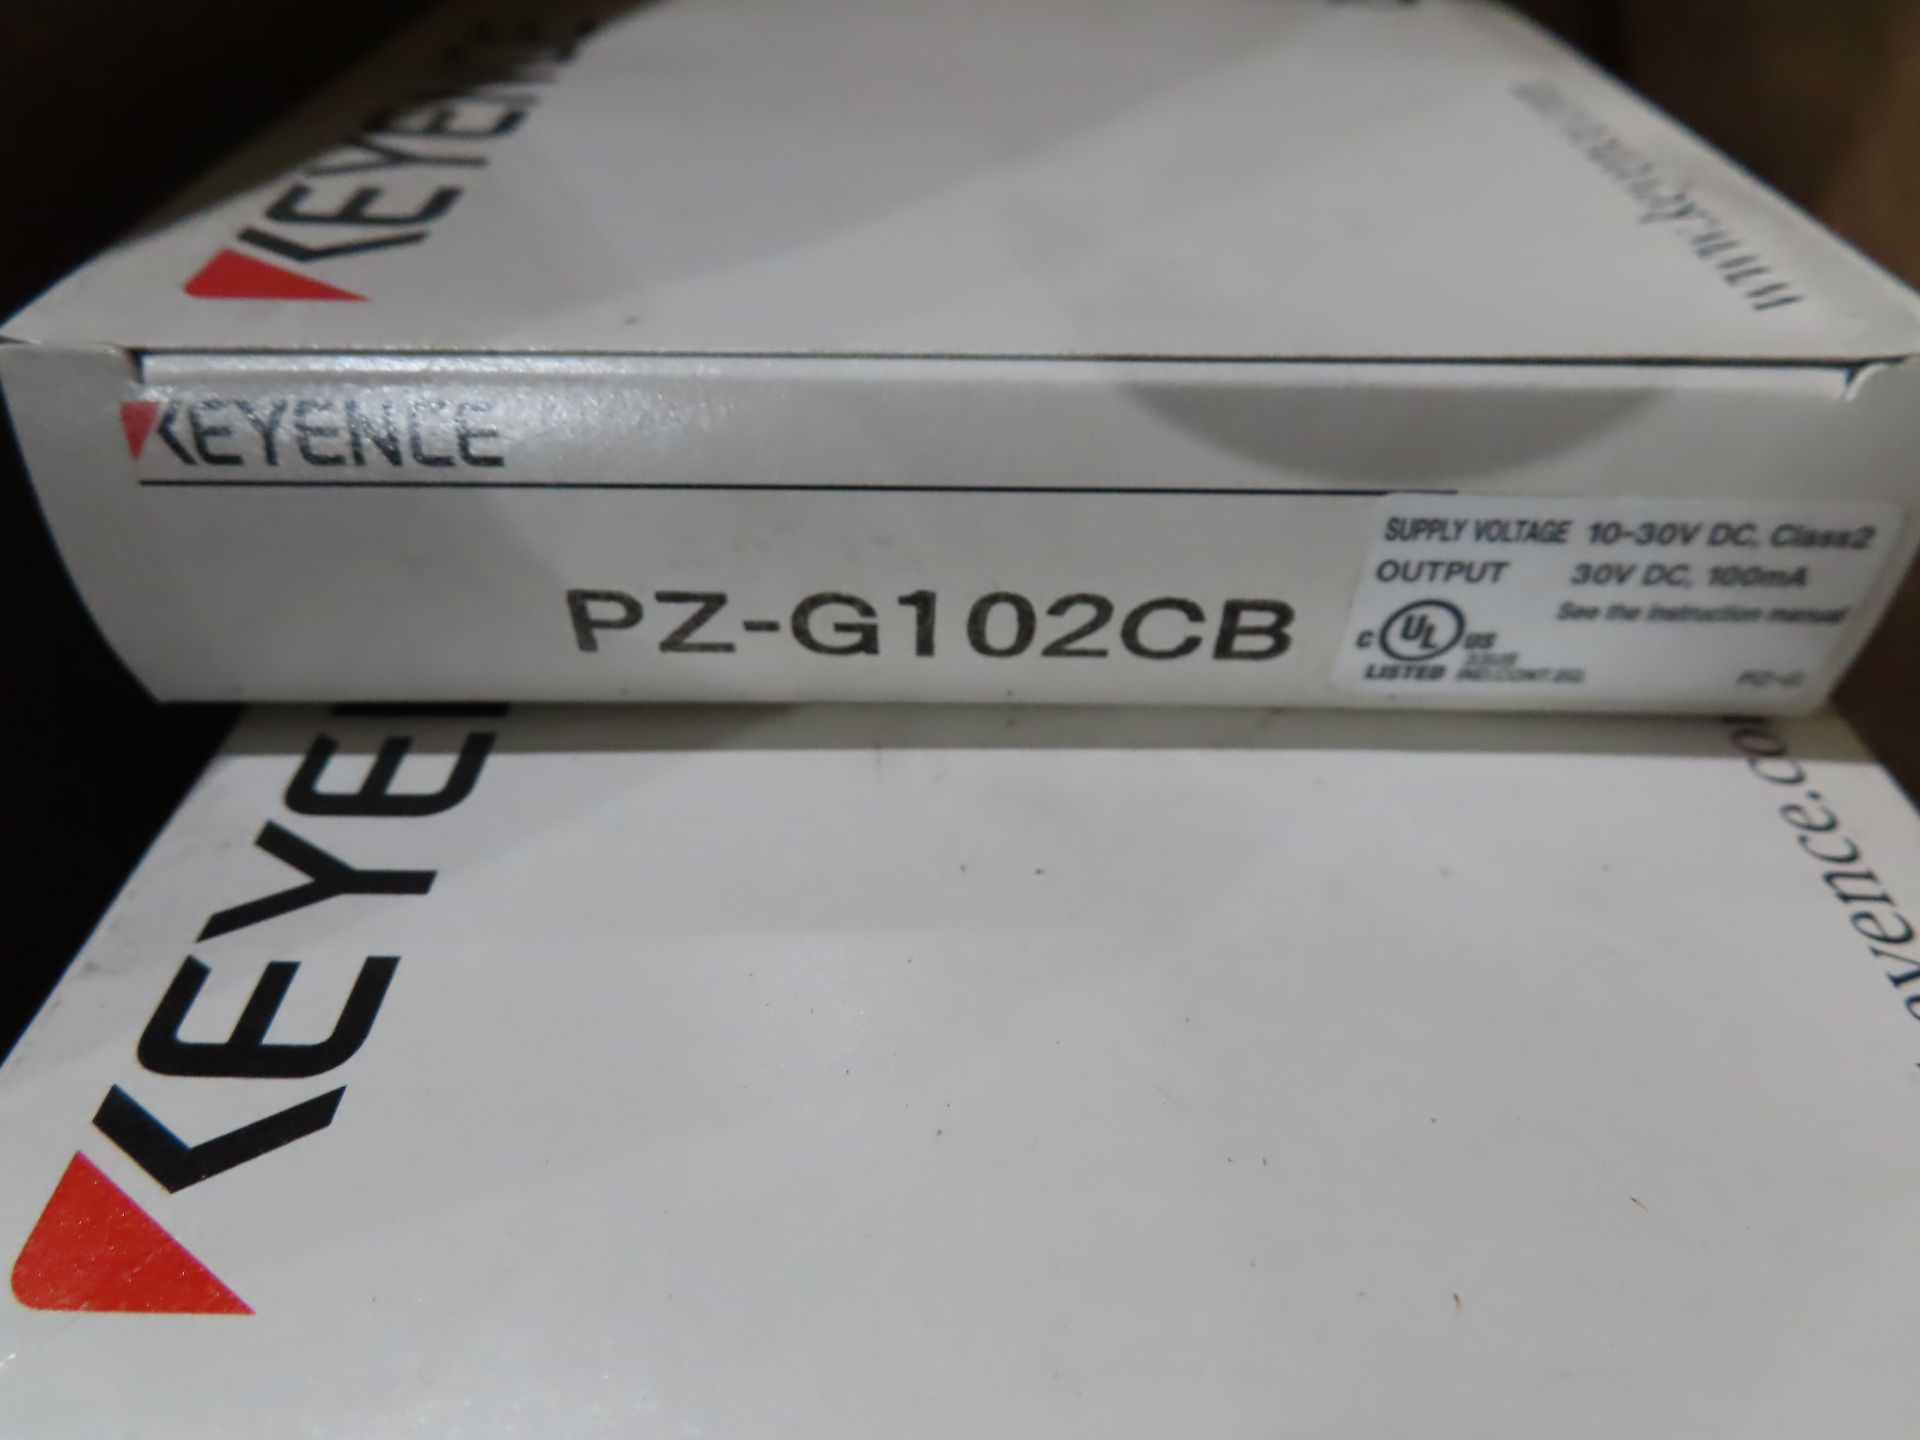 Qty 3 Keyence model PZ-G102CB, new in box, as always with Brolyn LLC auctions, all lots can be - Image 2 of 2